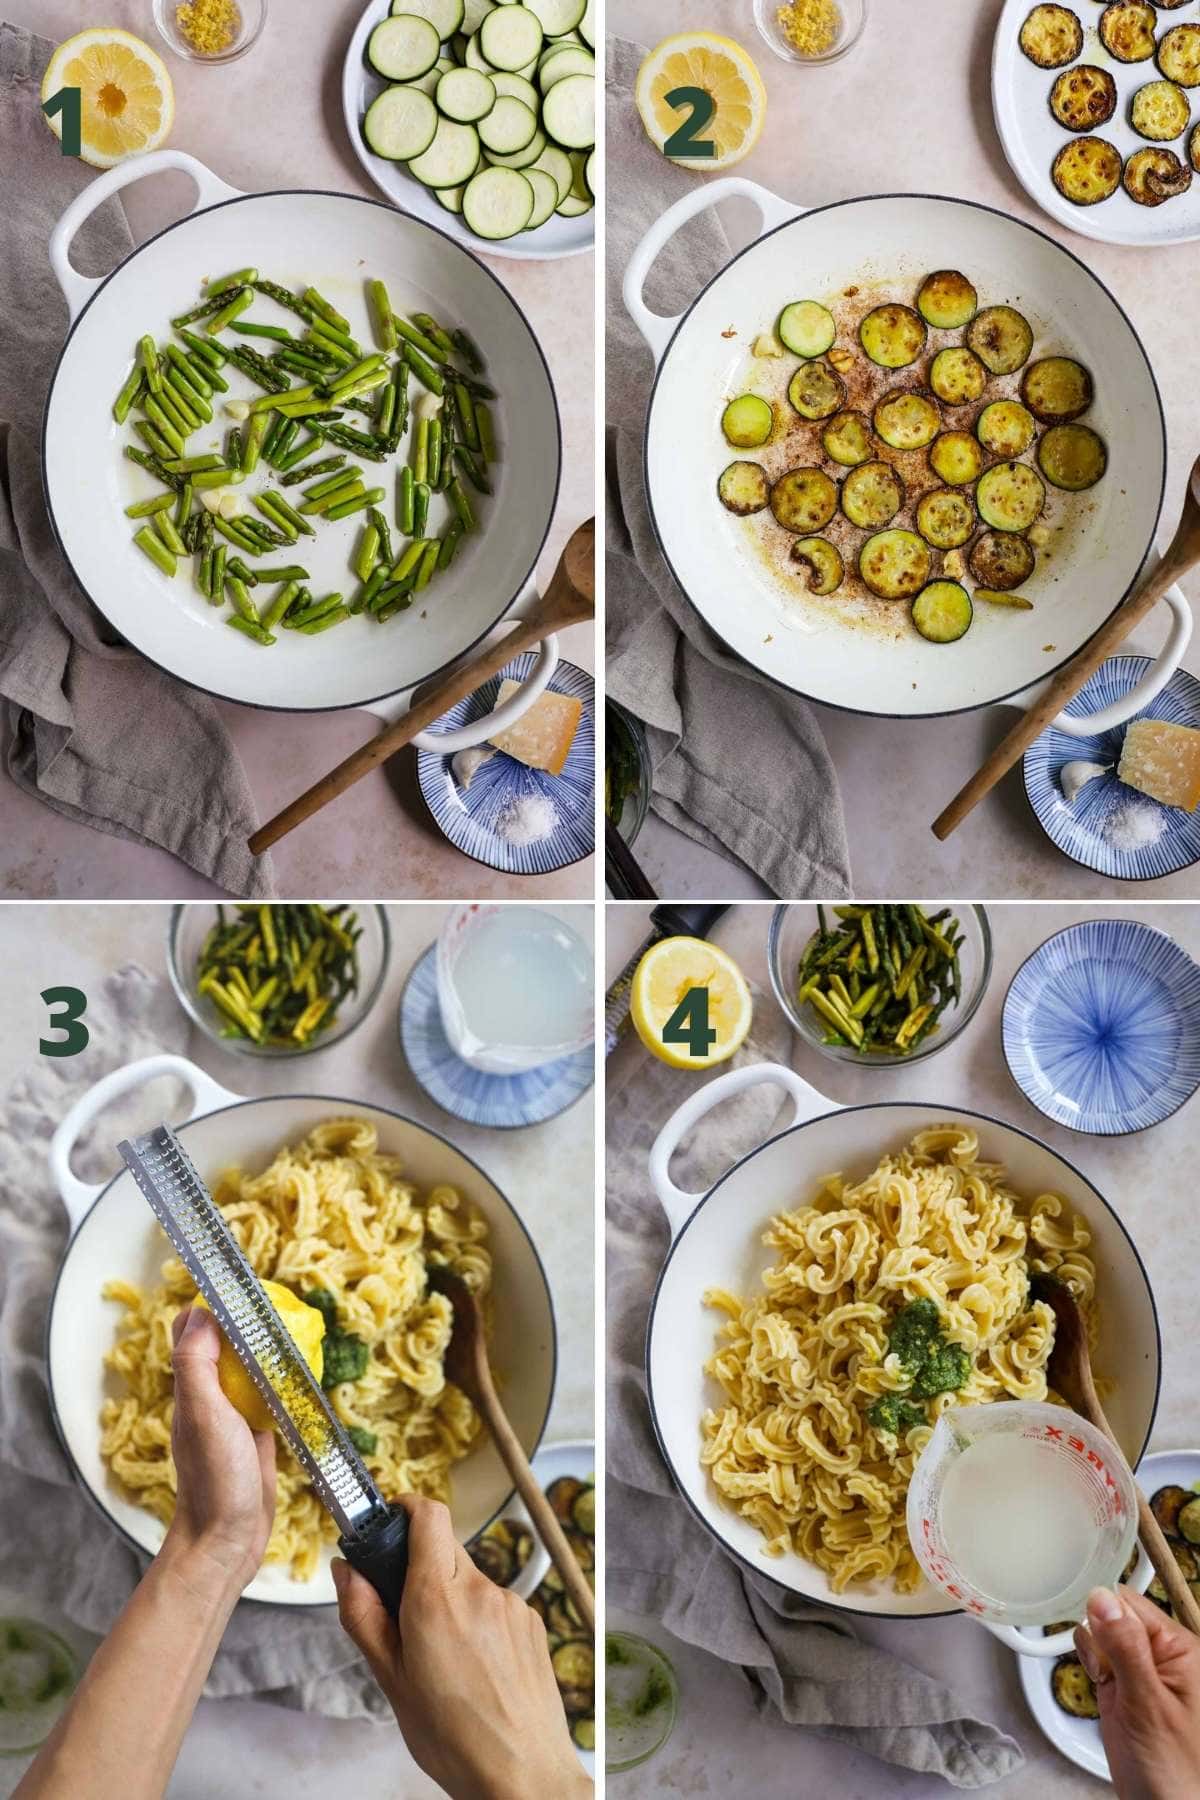 Instructions to make veggie pesto pasta, including cooking the asparagus and zucchini, and adding lemon zest, lemon juice, and pasta water to the pasta.